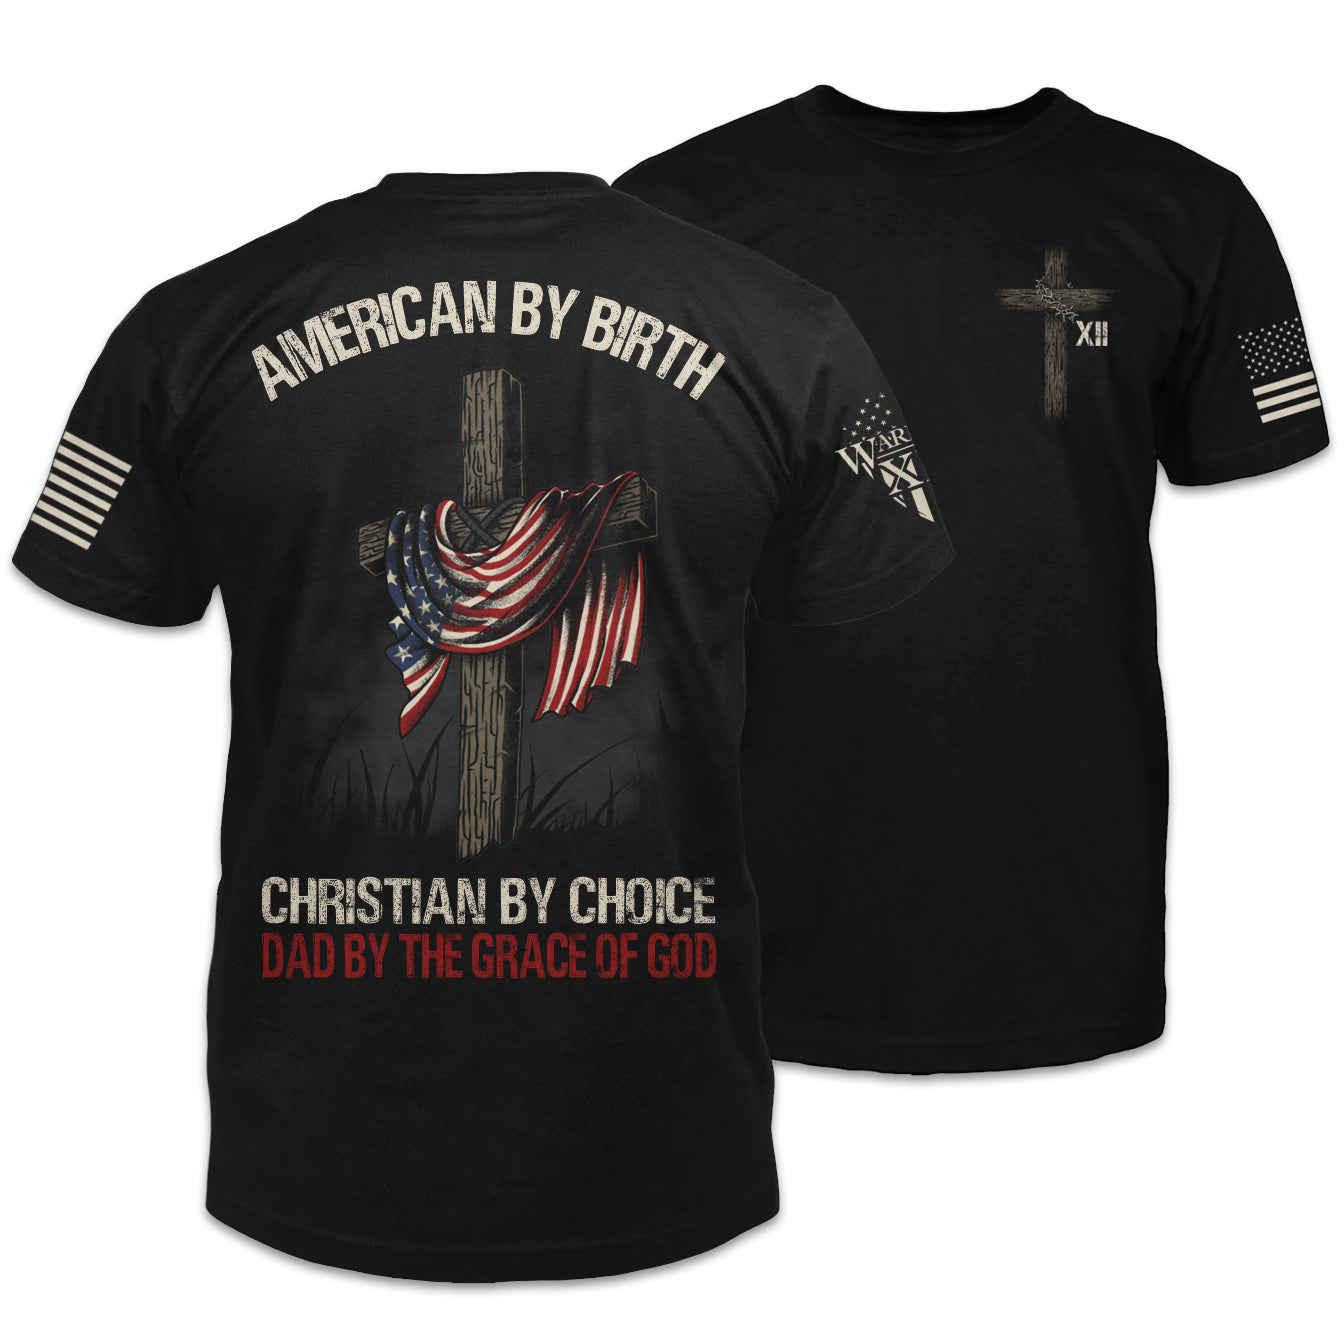 A black t-shirt featuring a design on the back of a large wooden cross with an American Flag draped over it and the words "American by Birth, Christian By Choice, Dad by the Grace of God," the front of the shirt features a small pocket image of a cross with a crown of thorns